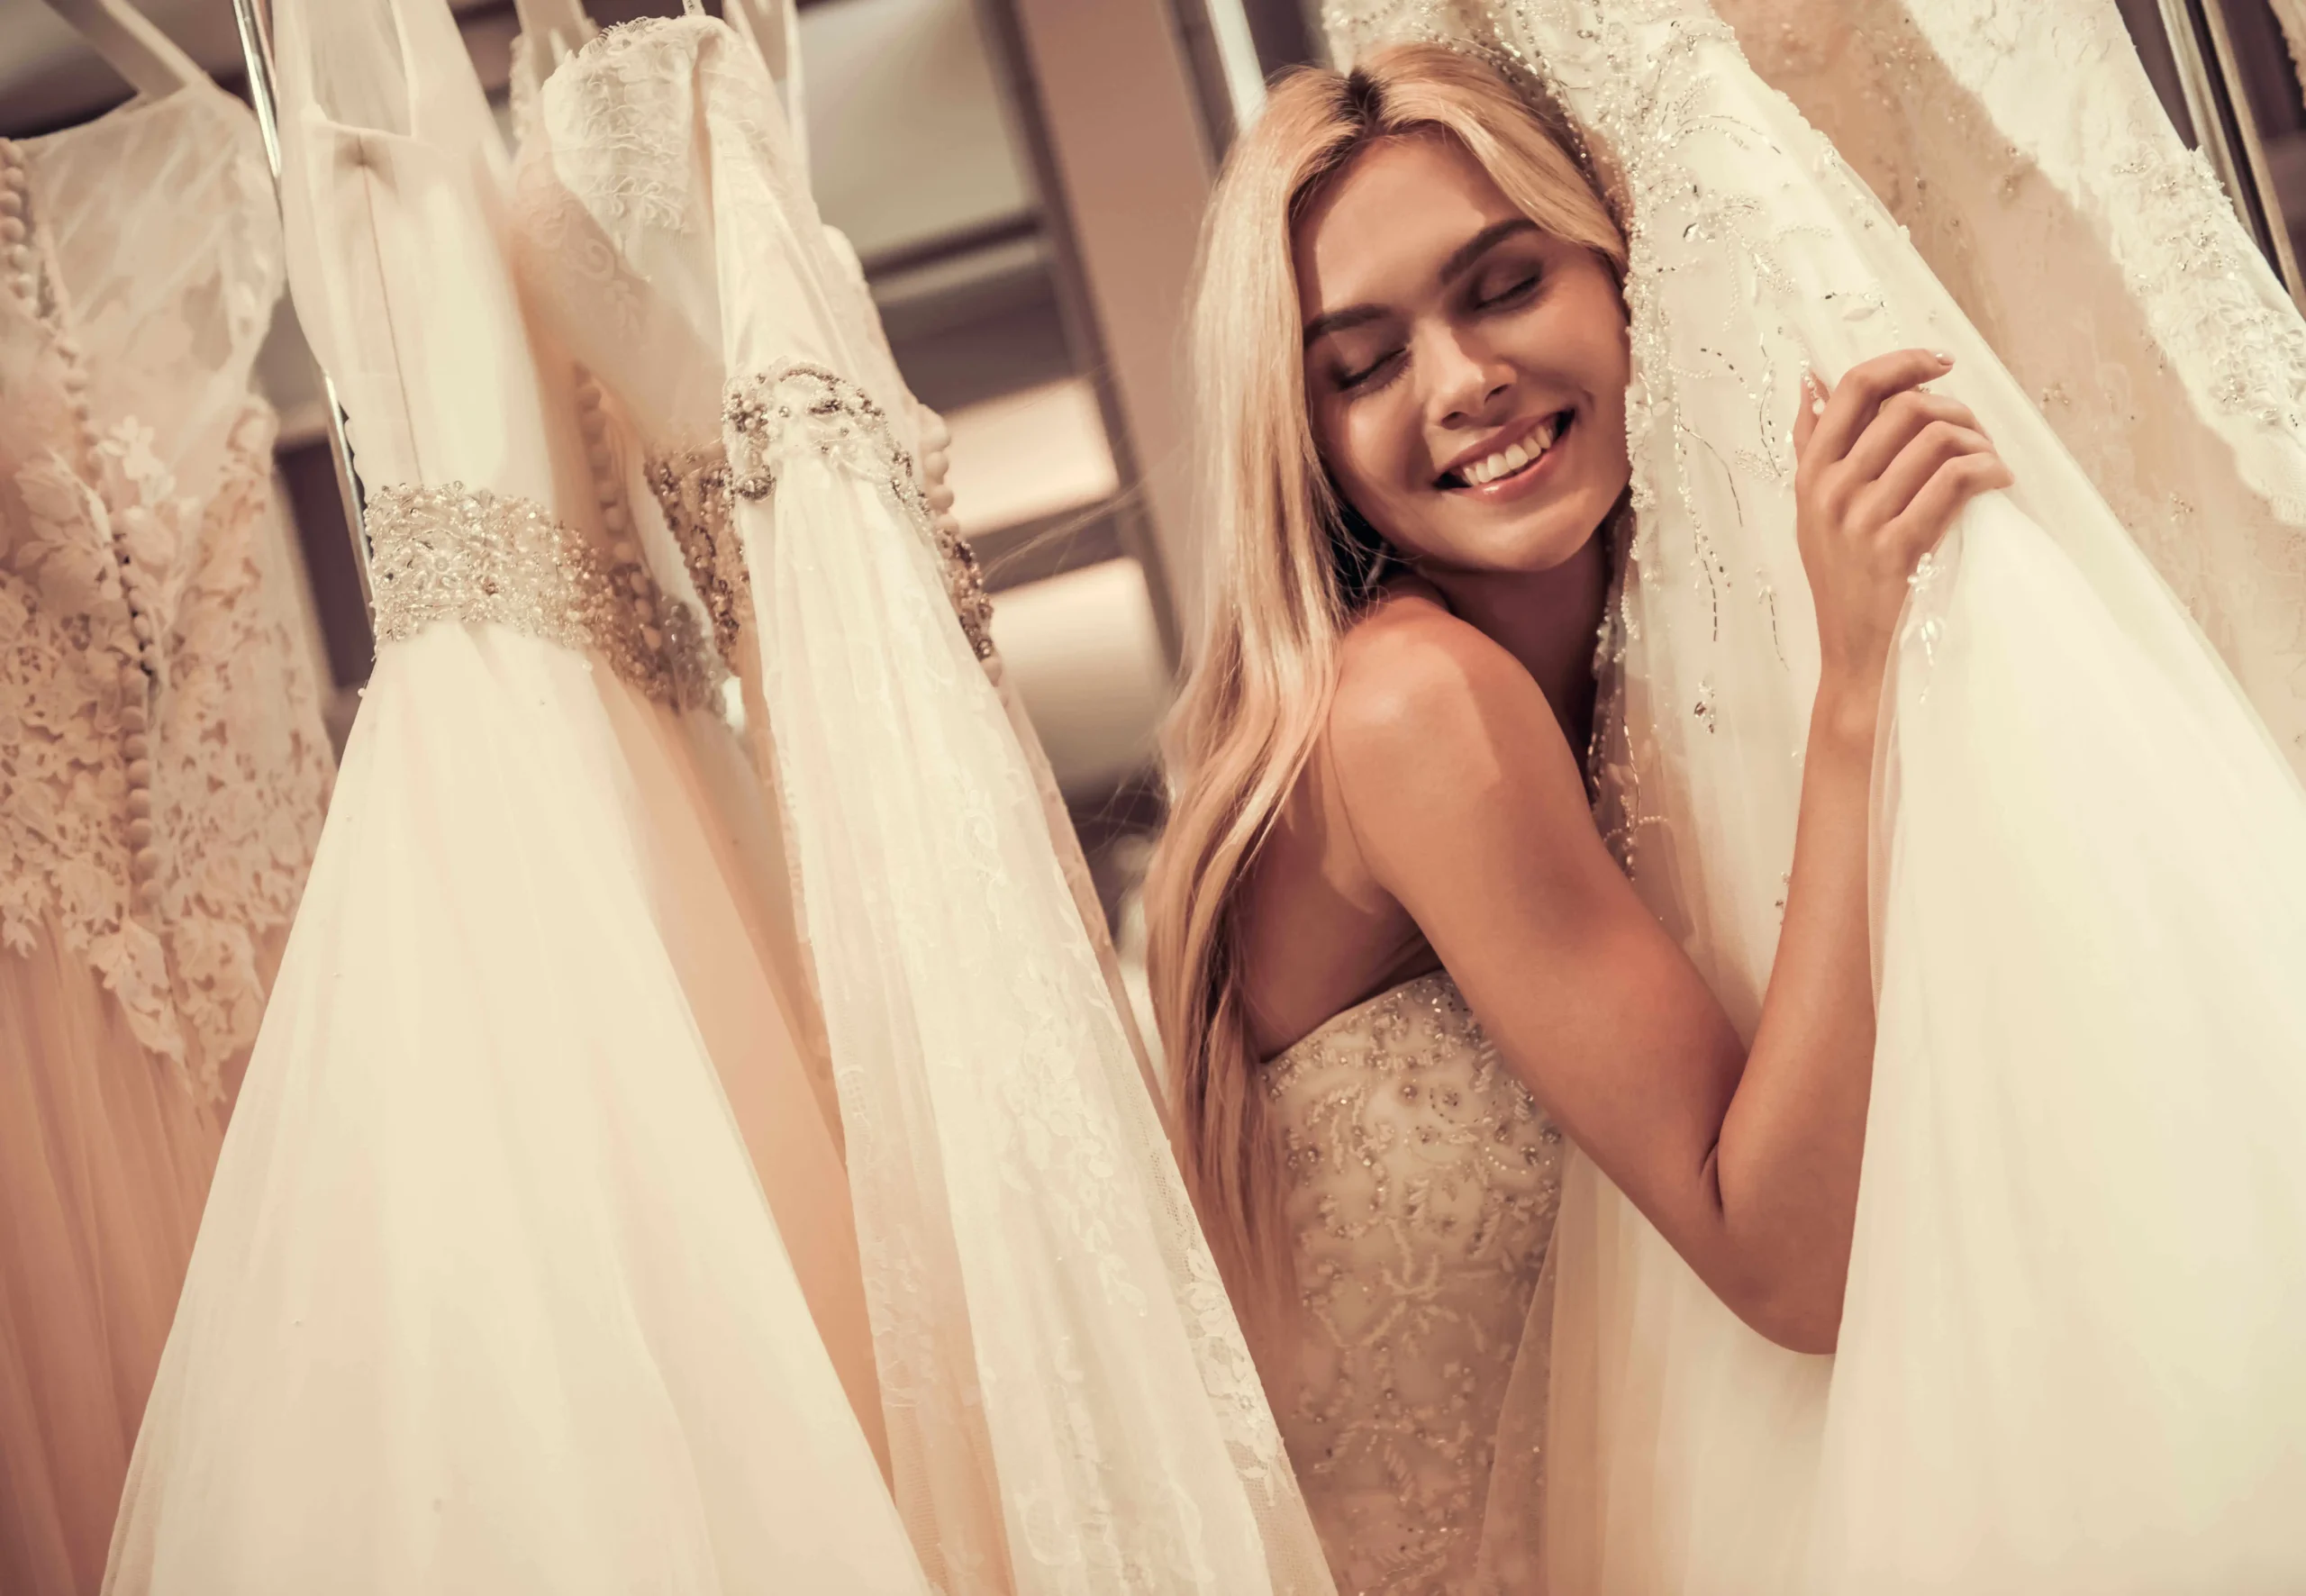 Best wedding dress selection in New Jersey